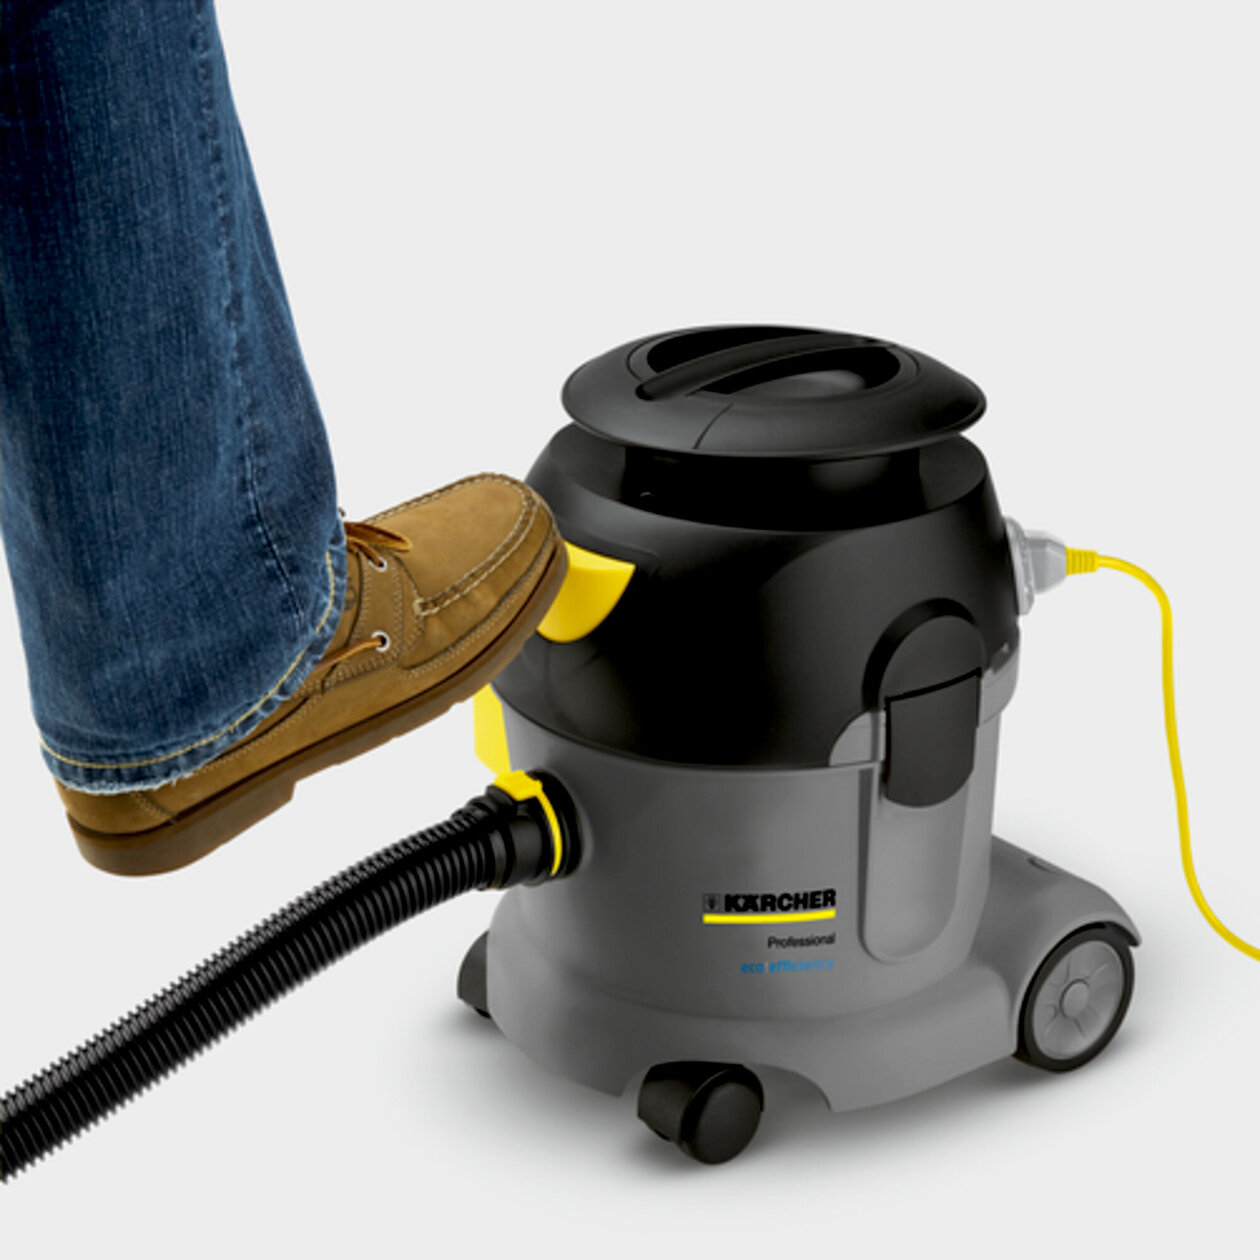 Dry vacuum cleaner T 10/1 eco!efficiency: Operation using foot switch